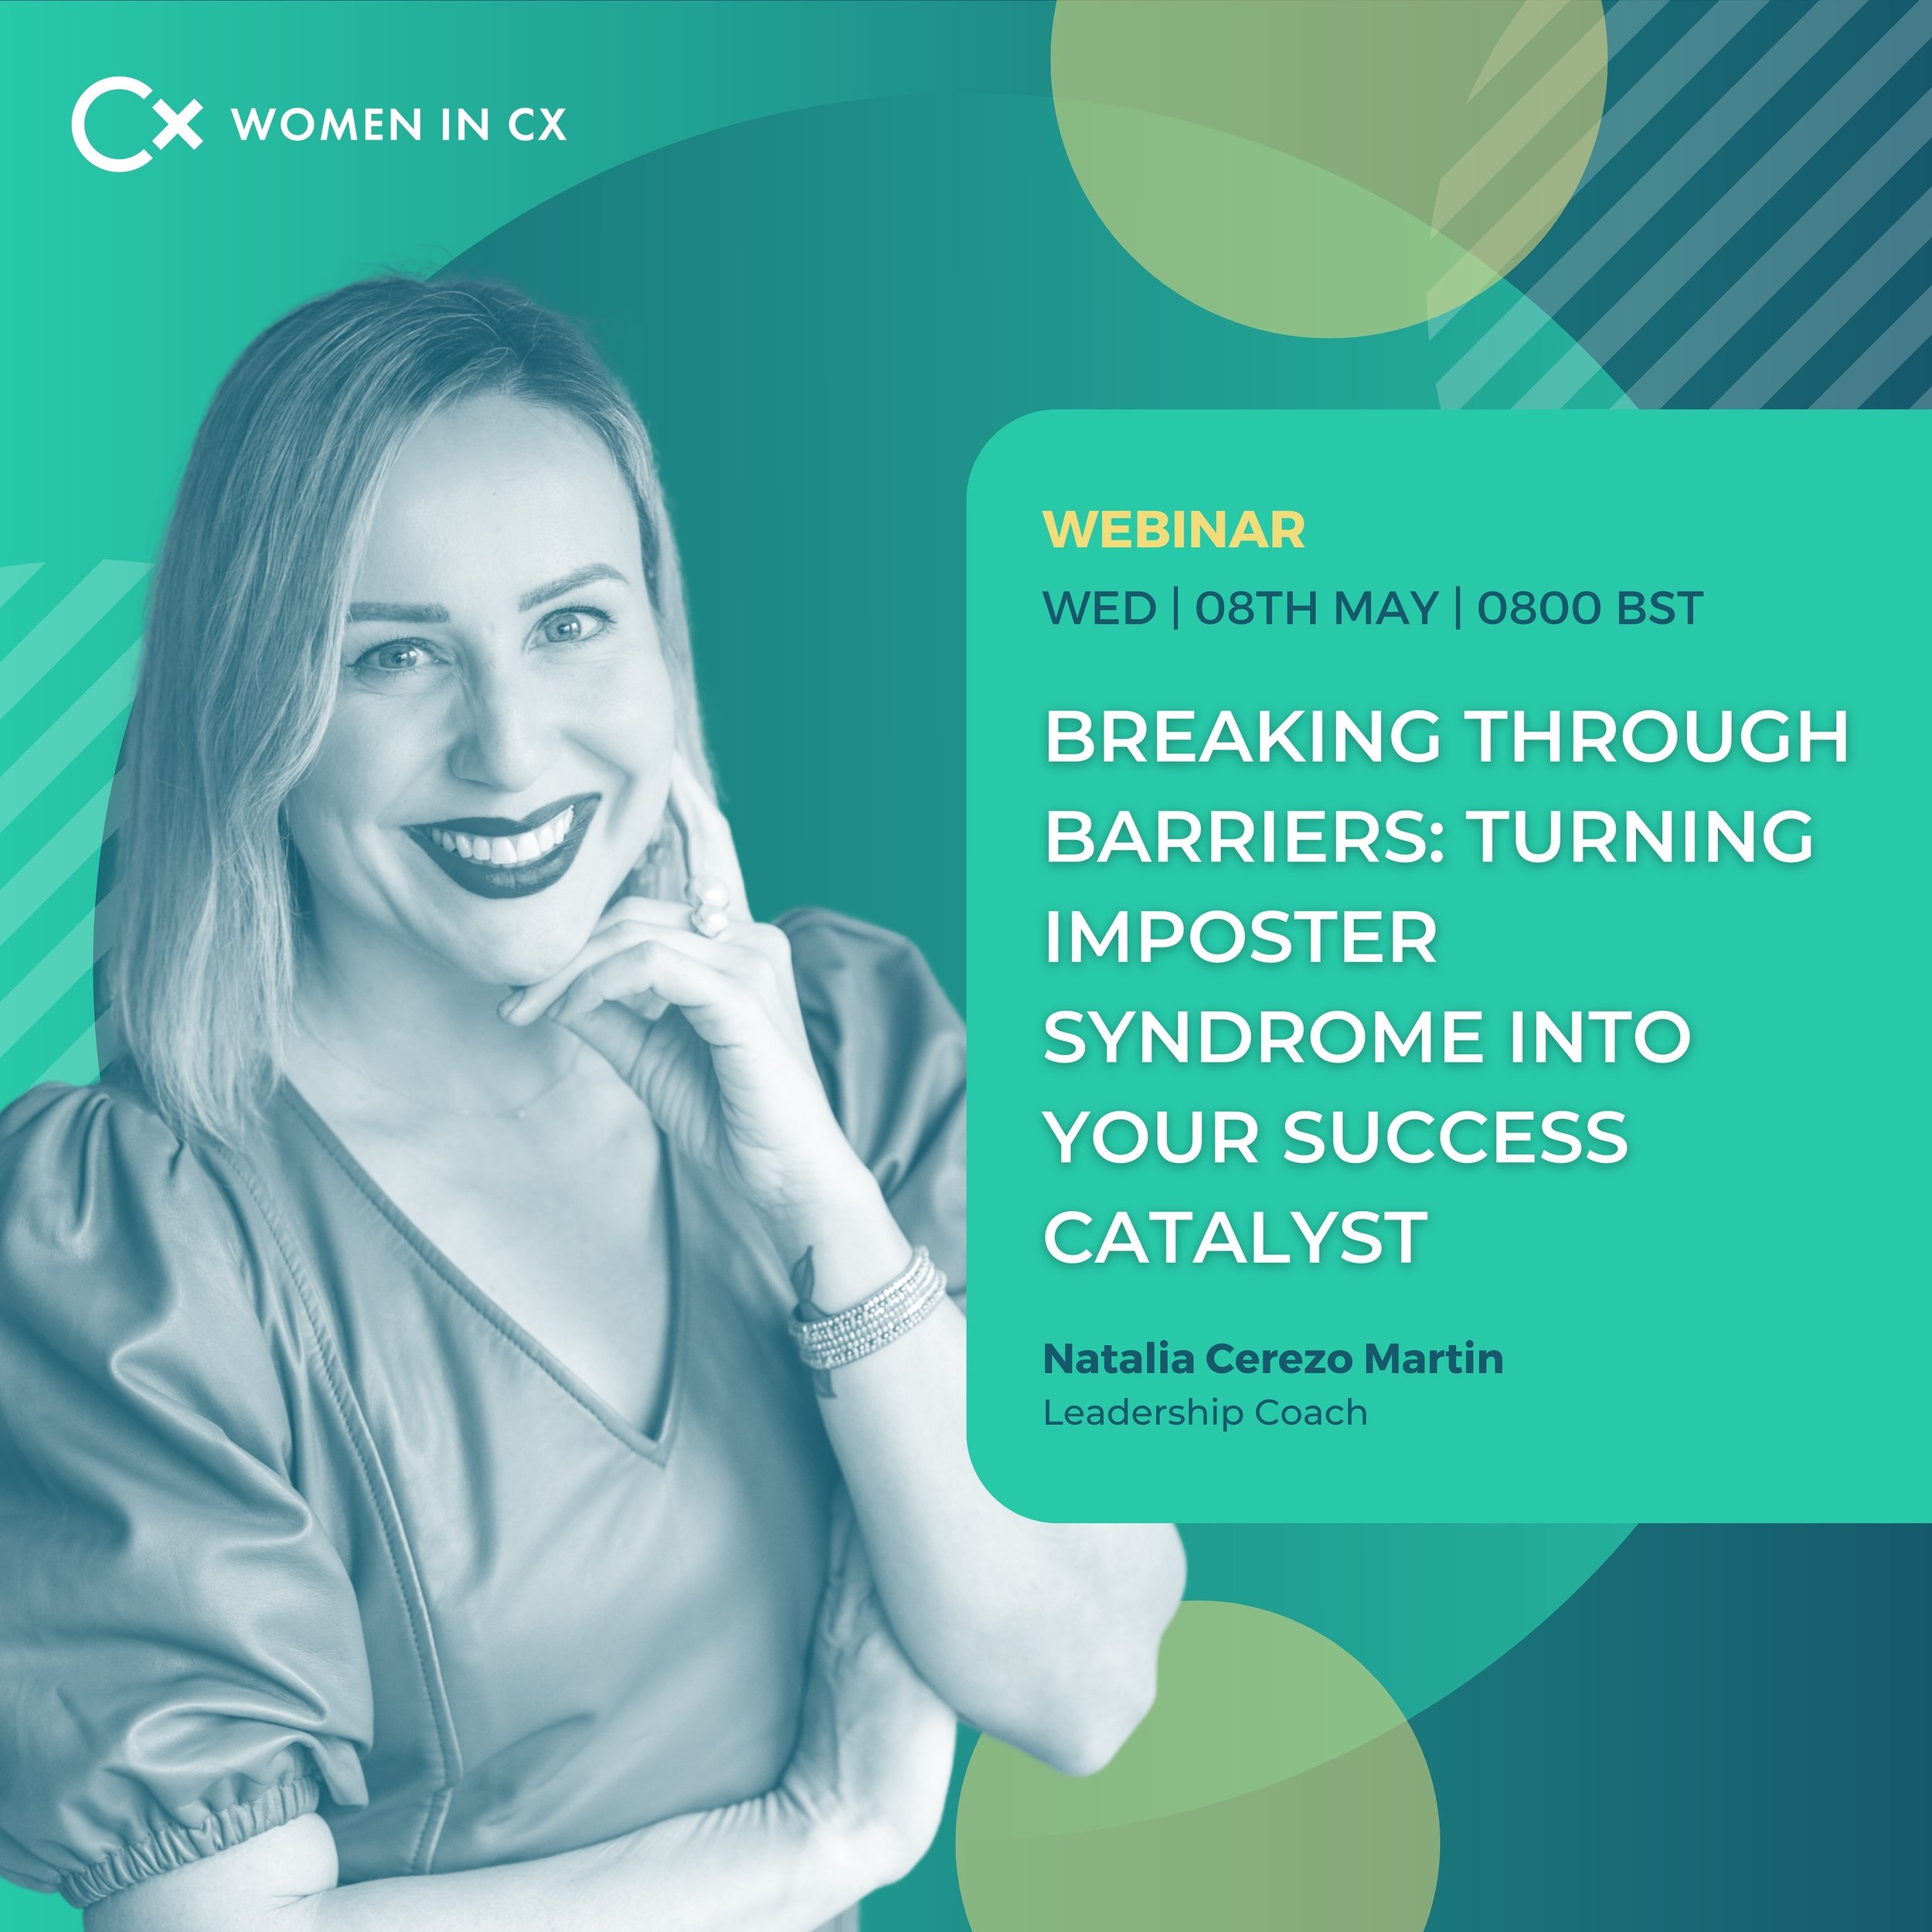 Did someone say, &lsquo;Bonus workshop&rsquo;? 😍
&nbsp;
That&rsquo;s right if you missed it, join Leadership Coach Natalia Cerezo Martin as she shares her exclusive workshop, &lsquo;Breaking Through Barriers: Turning Imposter Syndrome into Your Succ